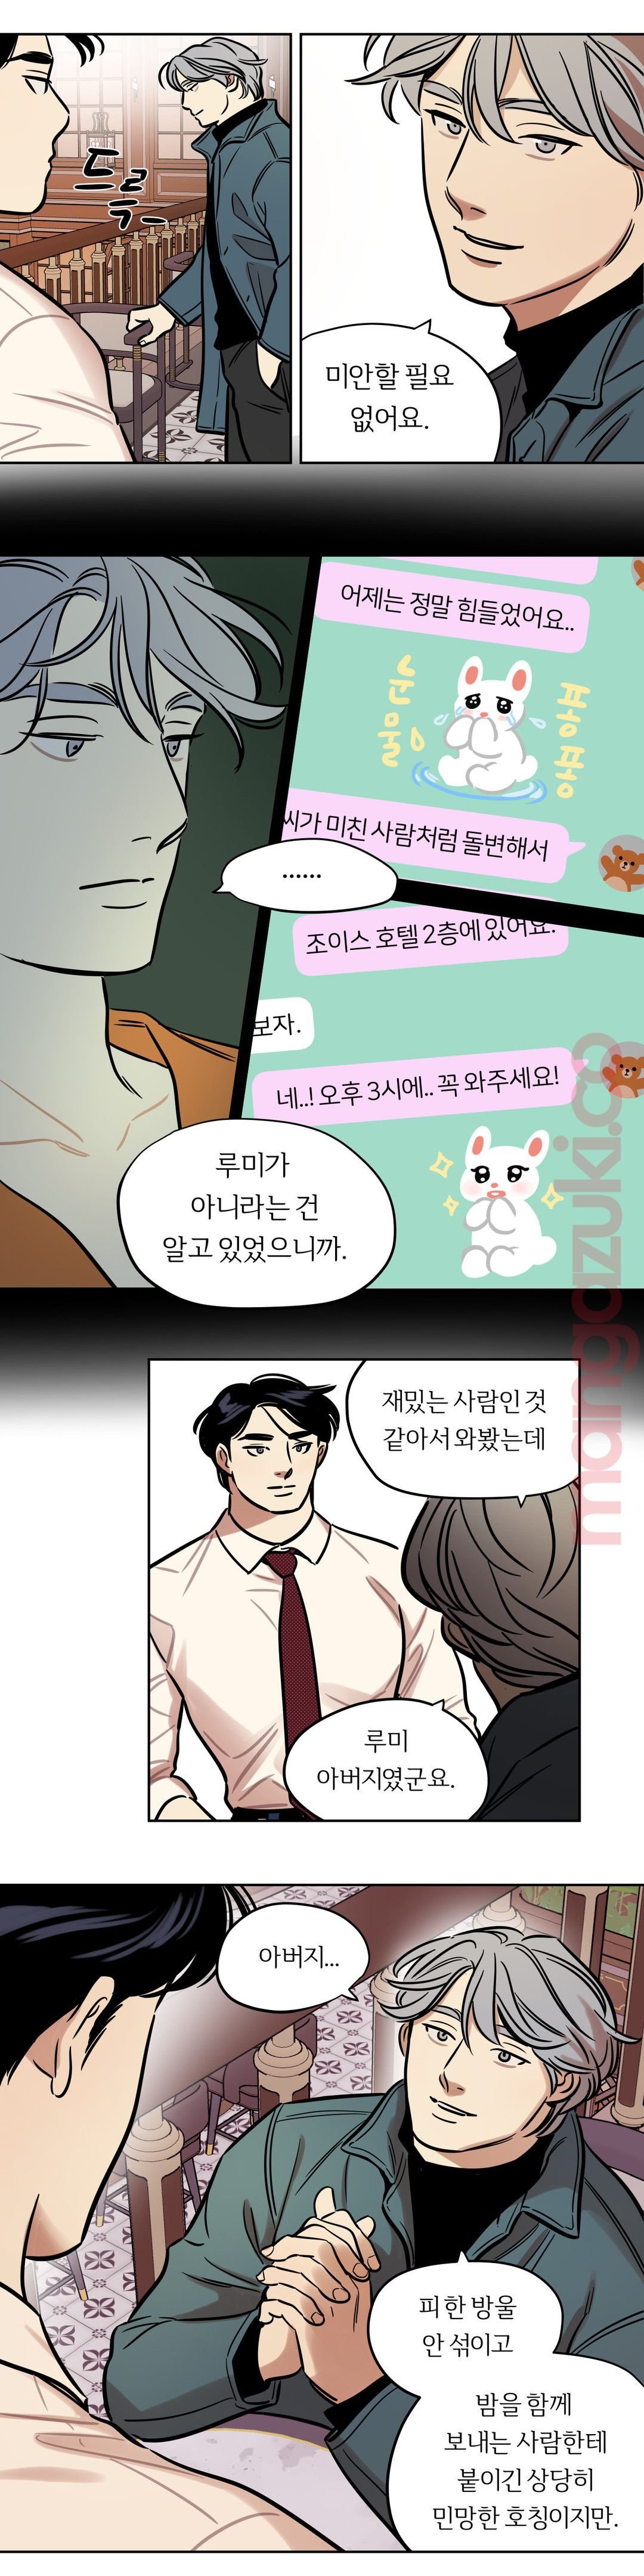 Snowman Raw - Chapter 40 Page 2